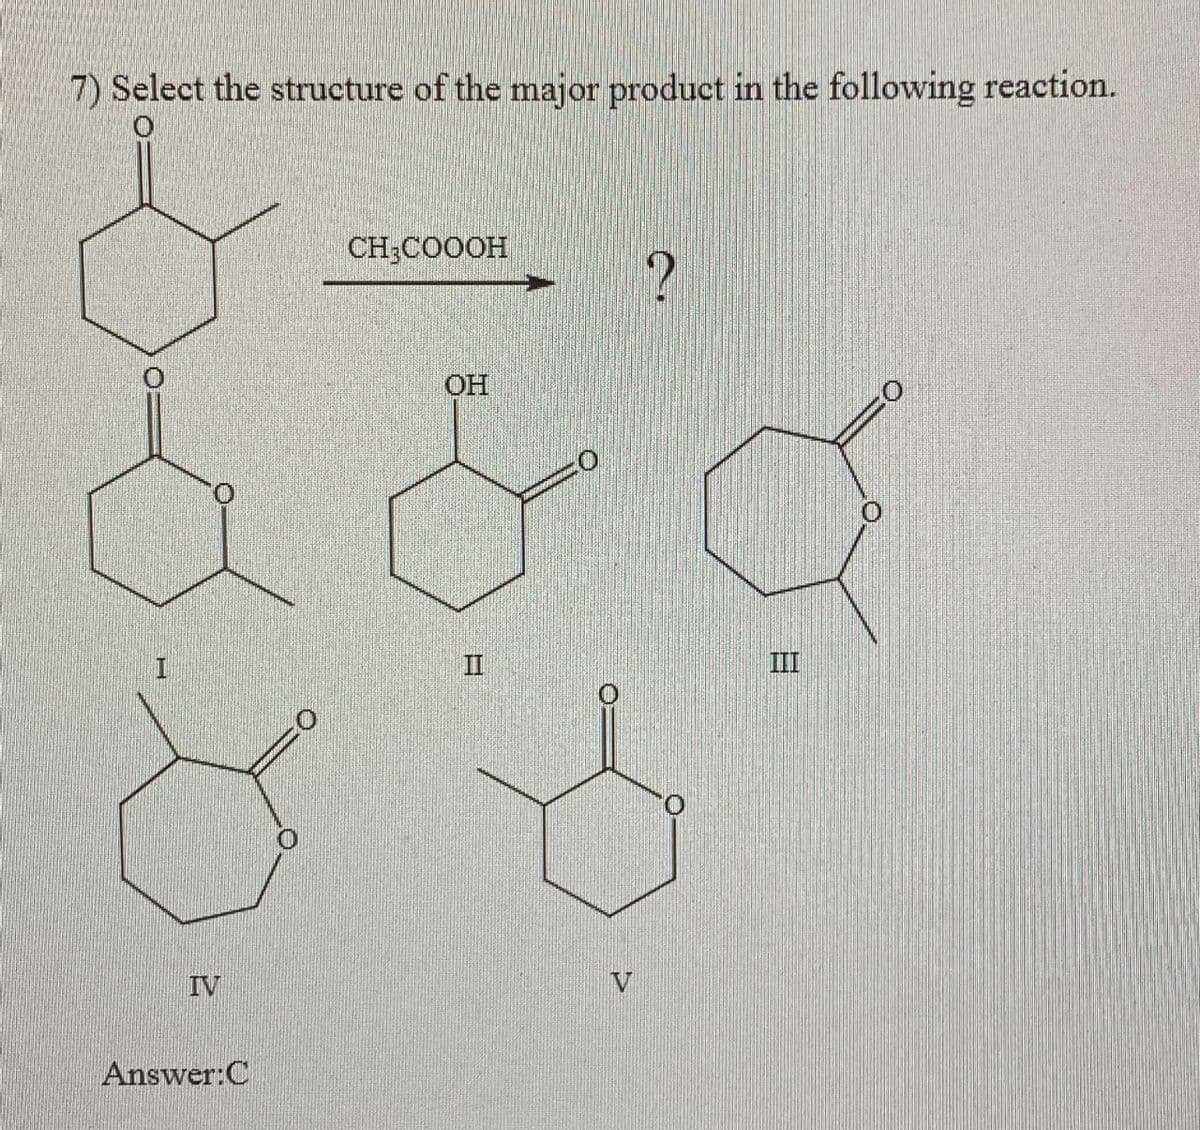 7) Select the structure of the major product in the following reaction.
O
CH3COOOH
?
OH
I
II
III
IV
Answer:C
V